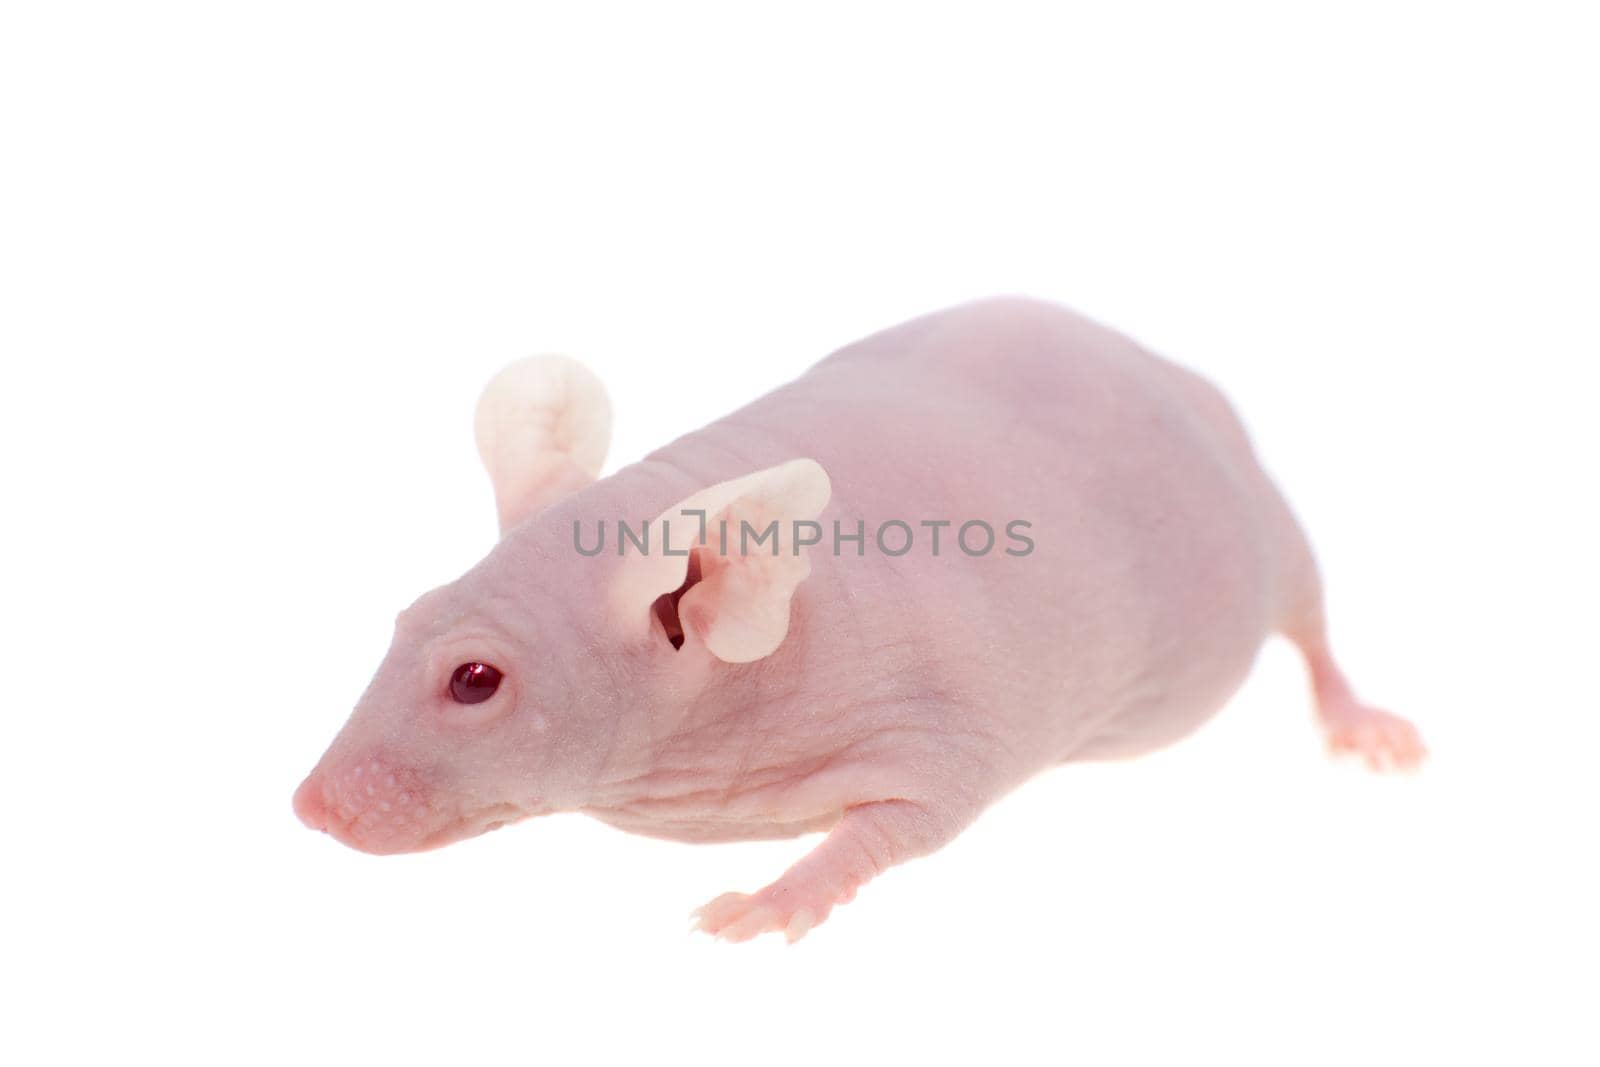 Hairless albino mouse, Mus musculus, isolated on white by RosaJay